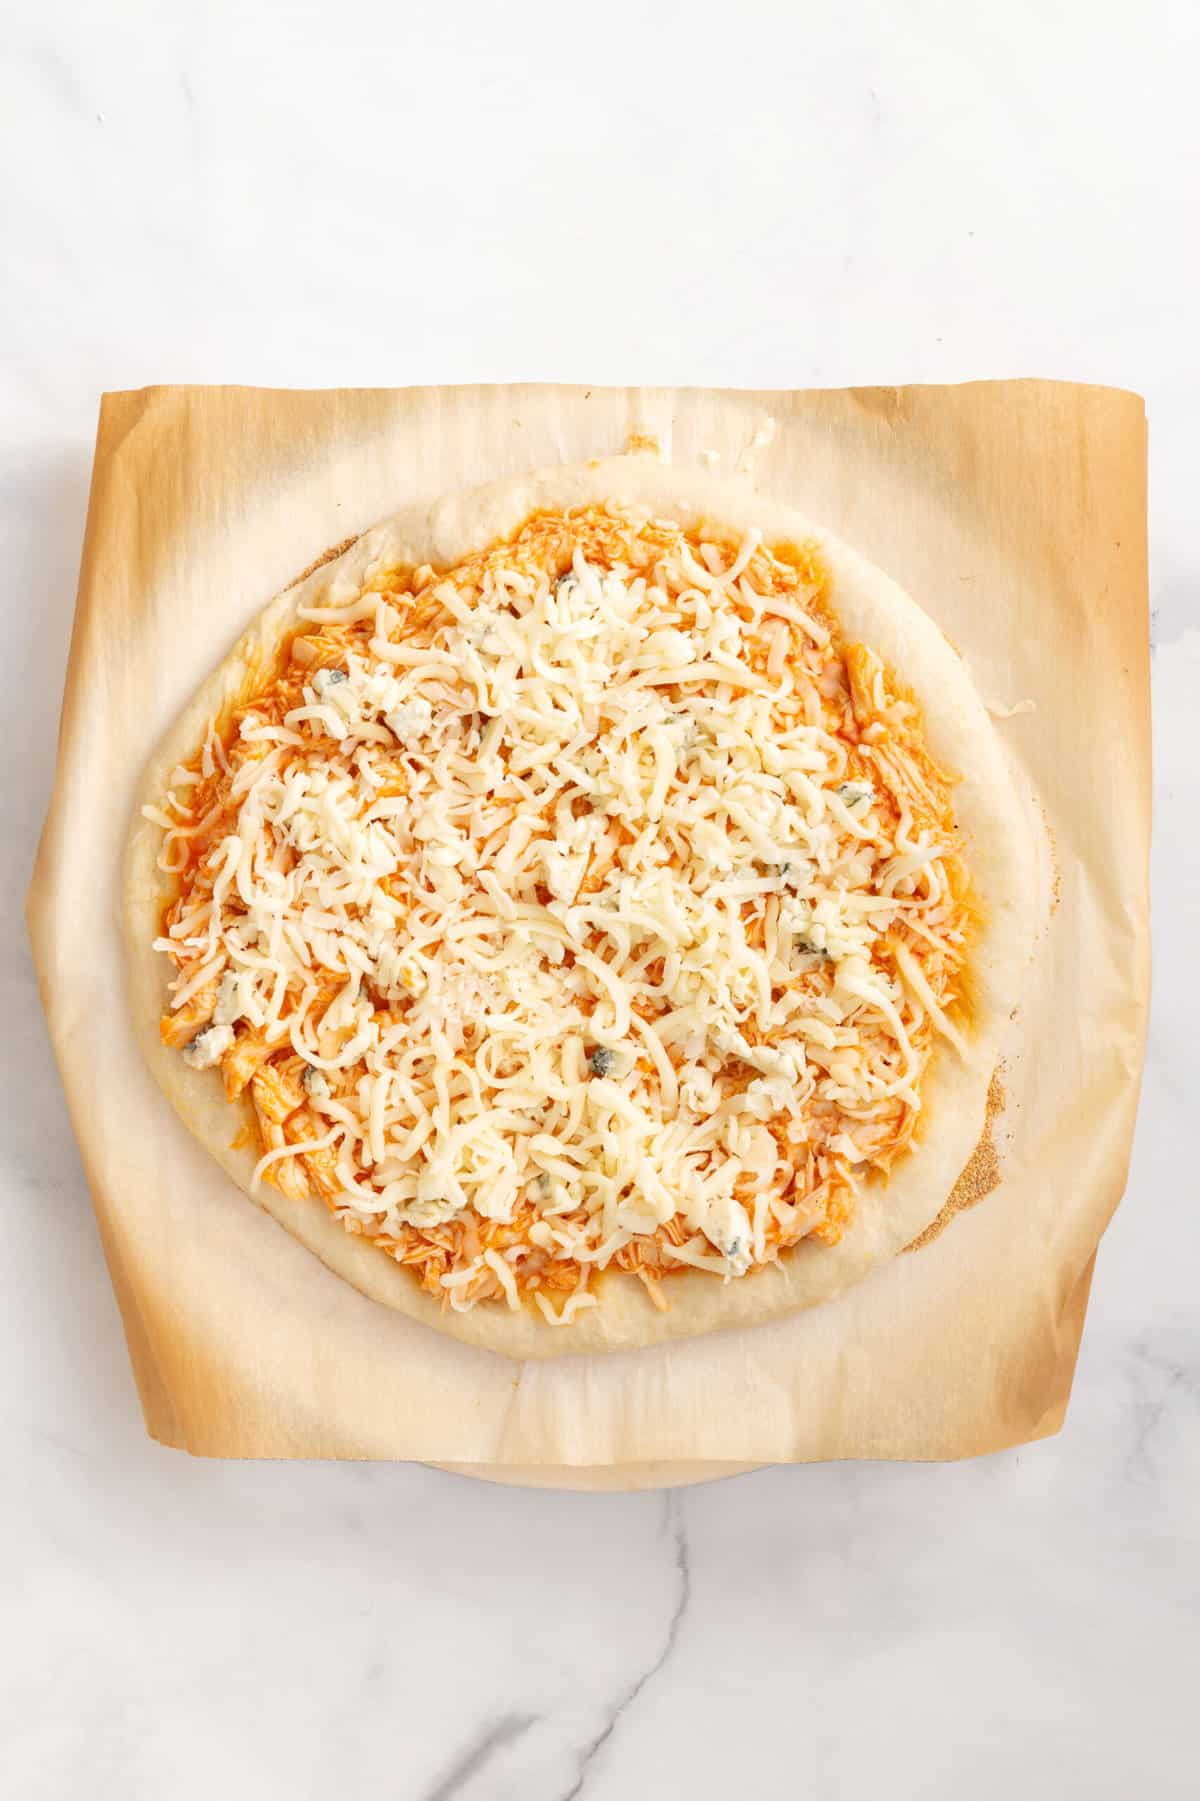 parbaked pizza crust with buffalo chicken mixture and shredded mozzarella cheese on top